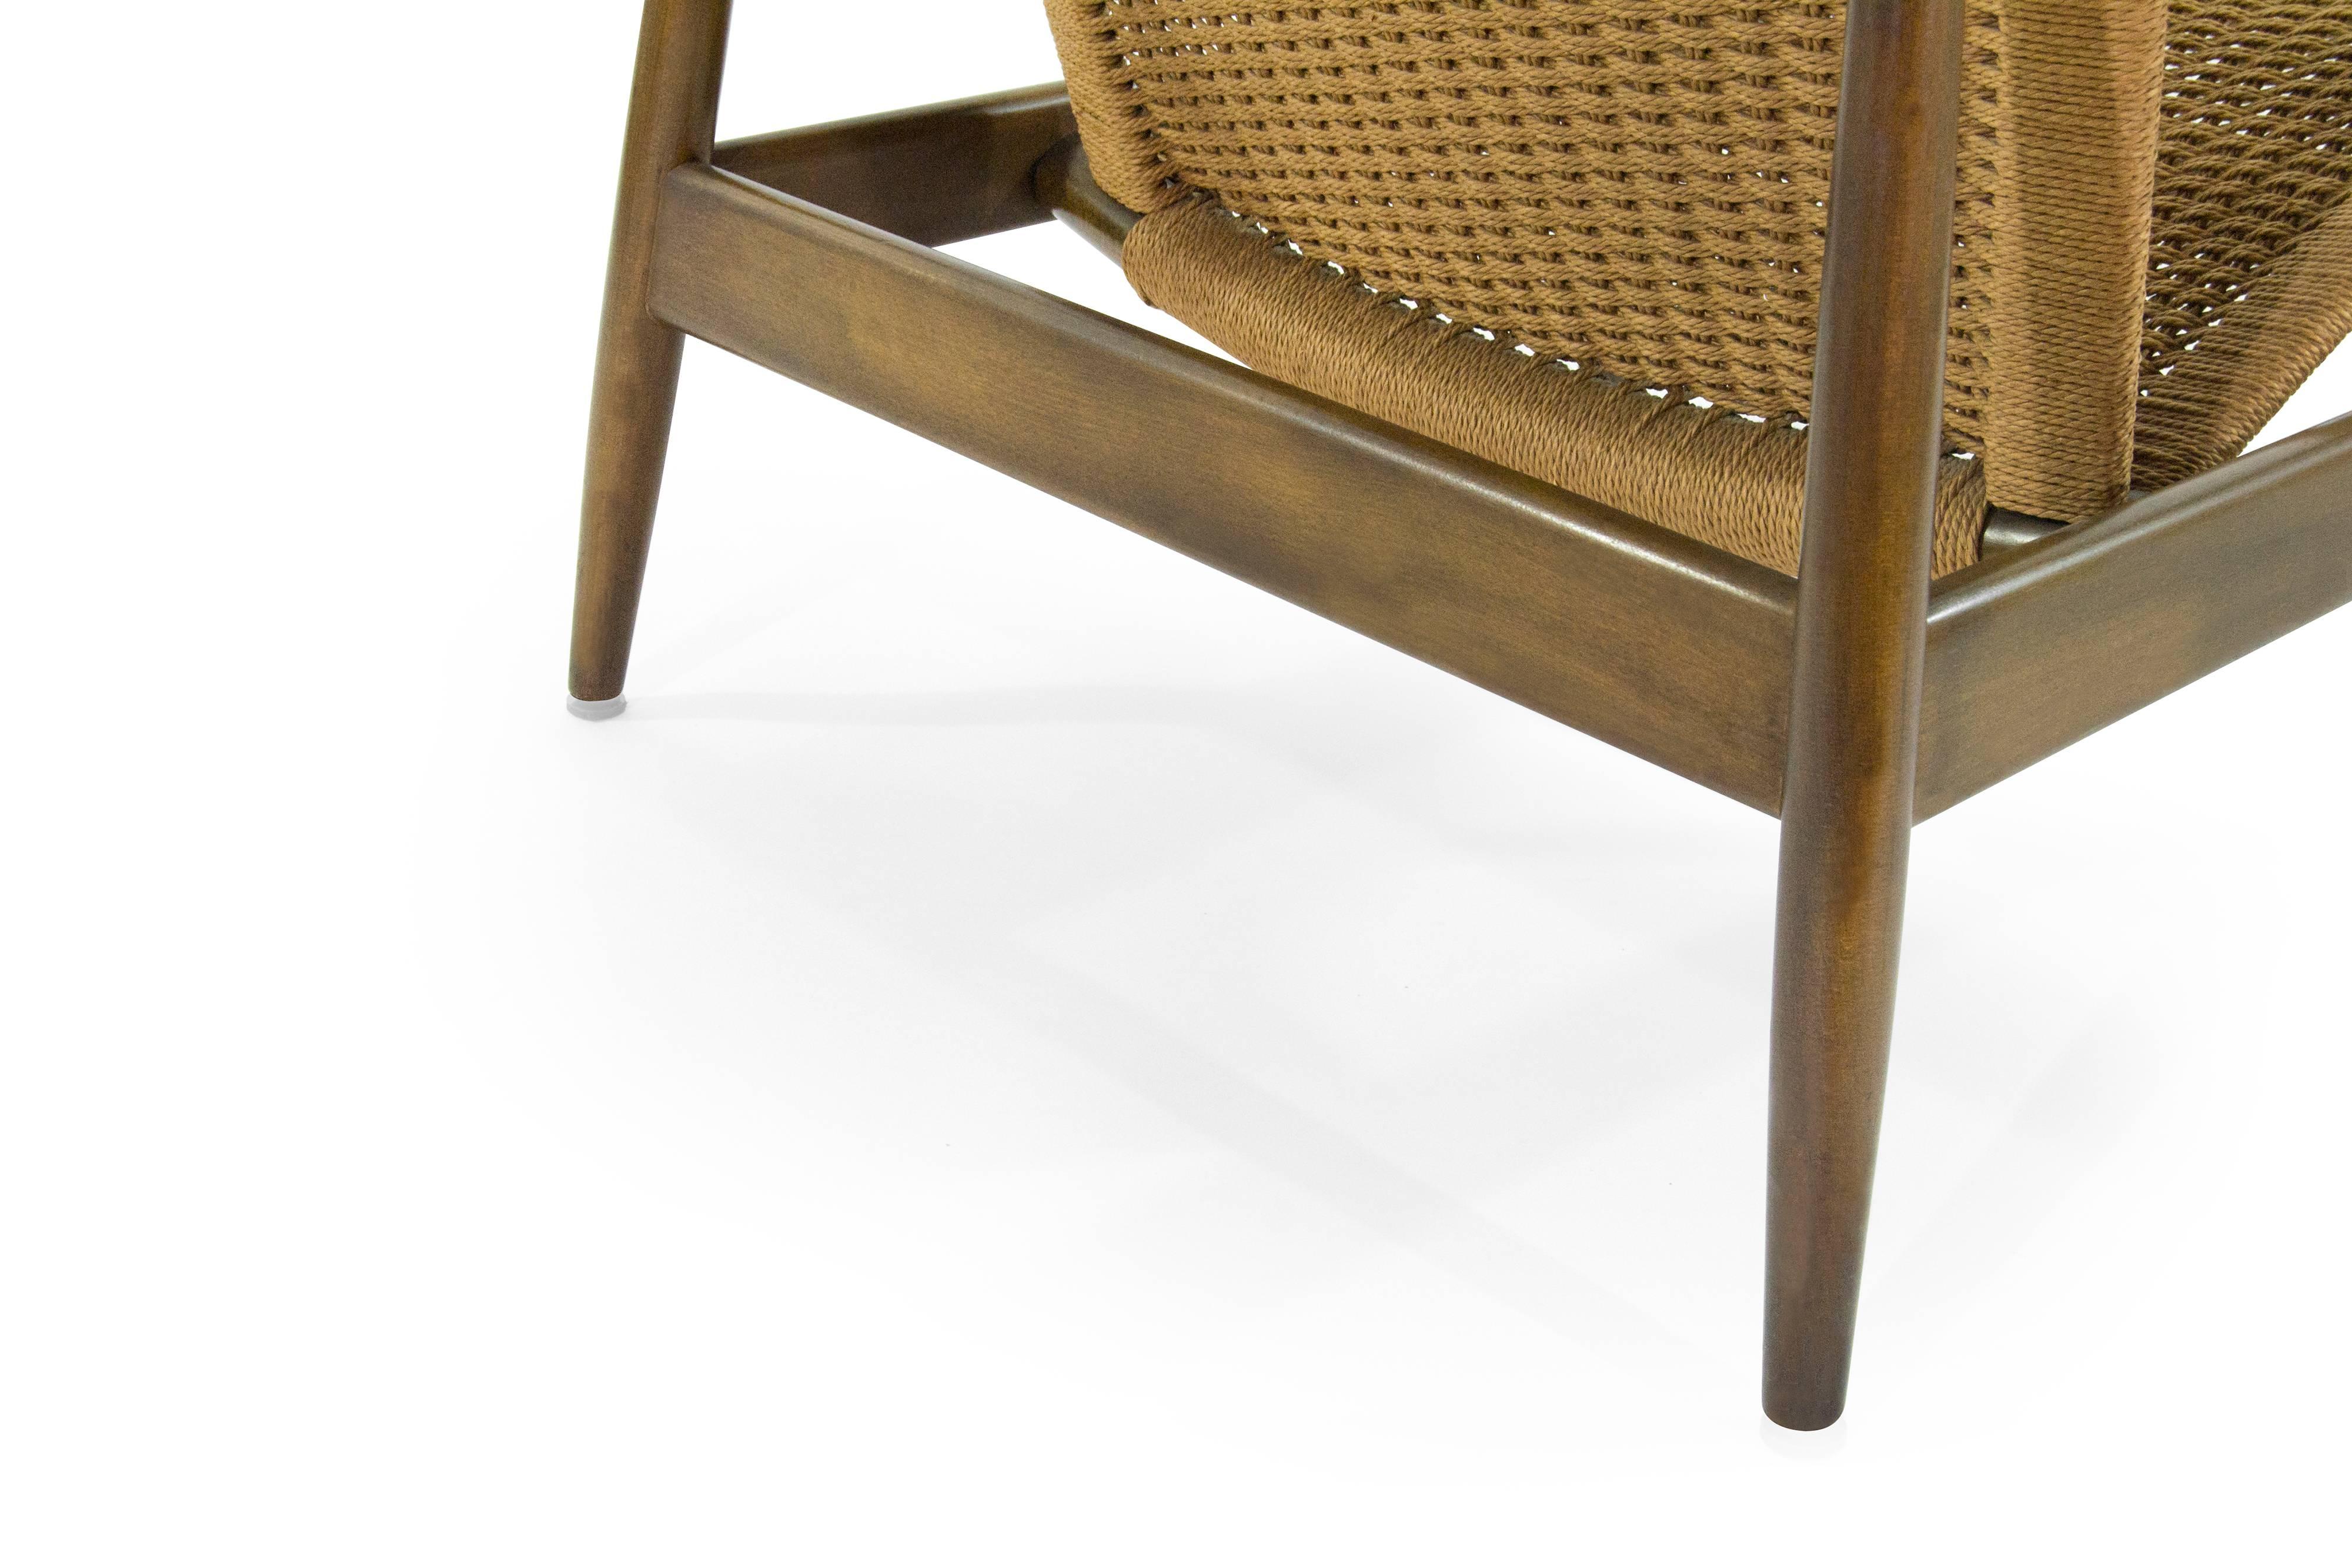 Illum Wikkelso Ringstol Number 23 Teak and Woven Cord Ring Chair 1